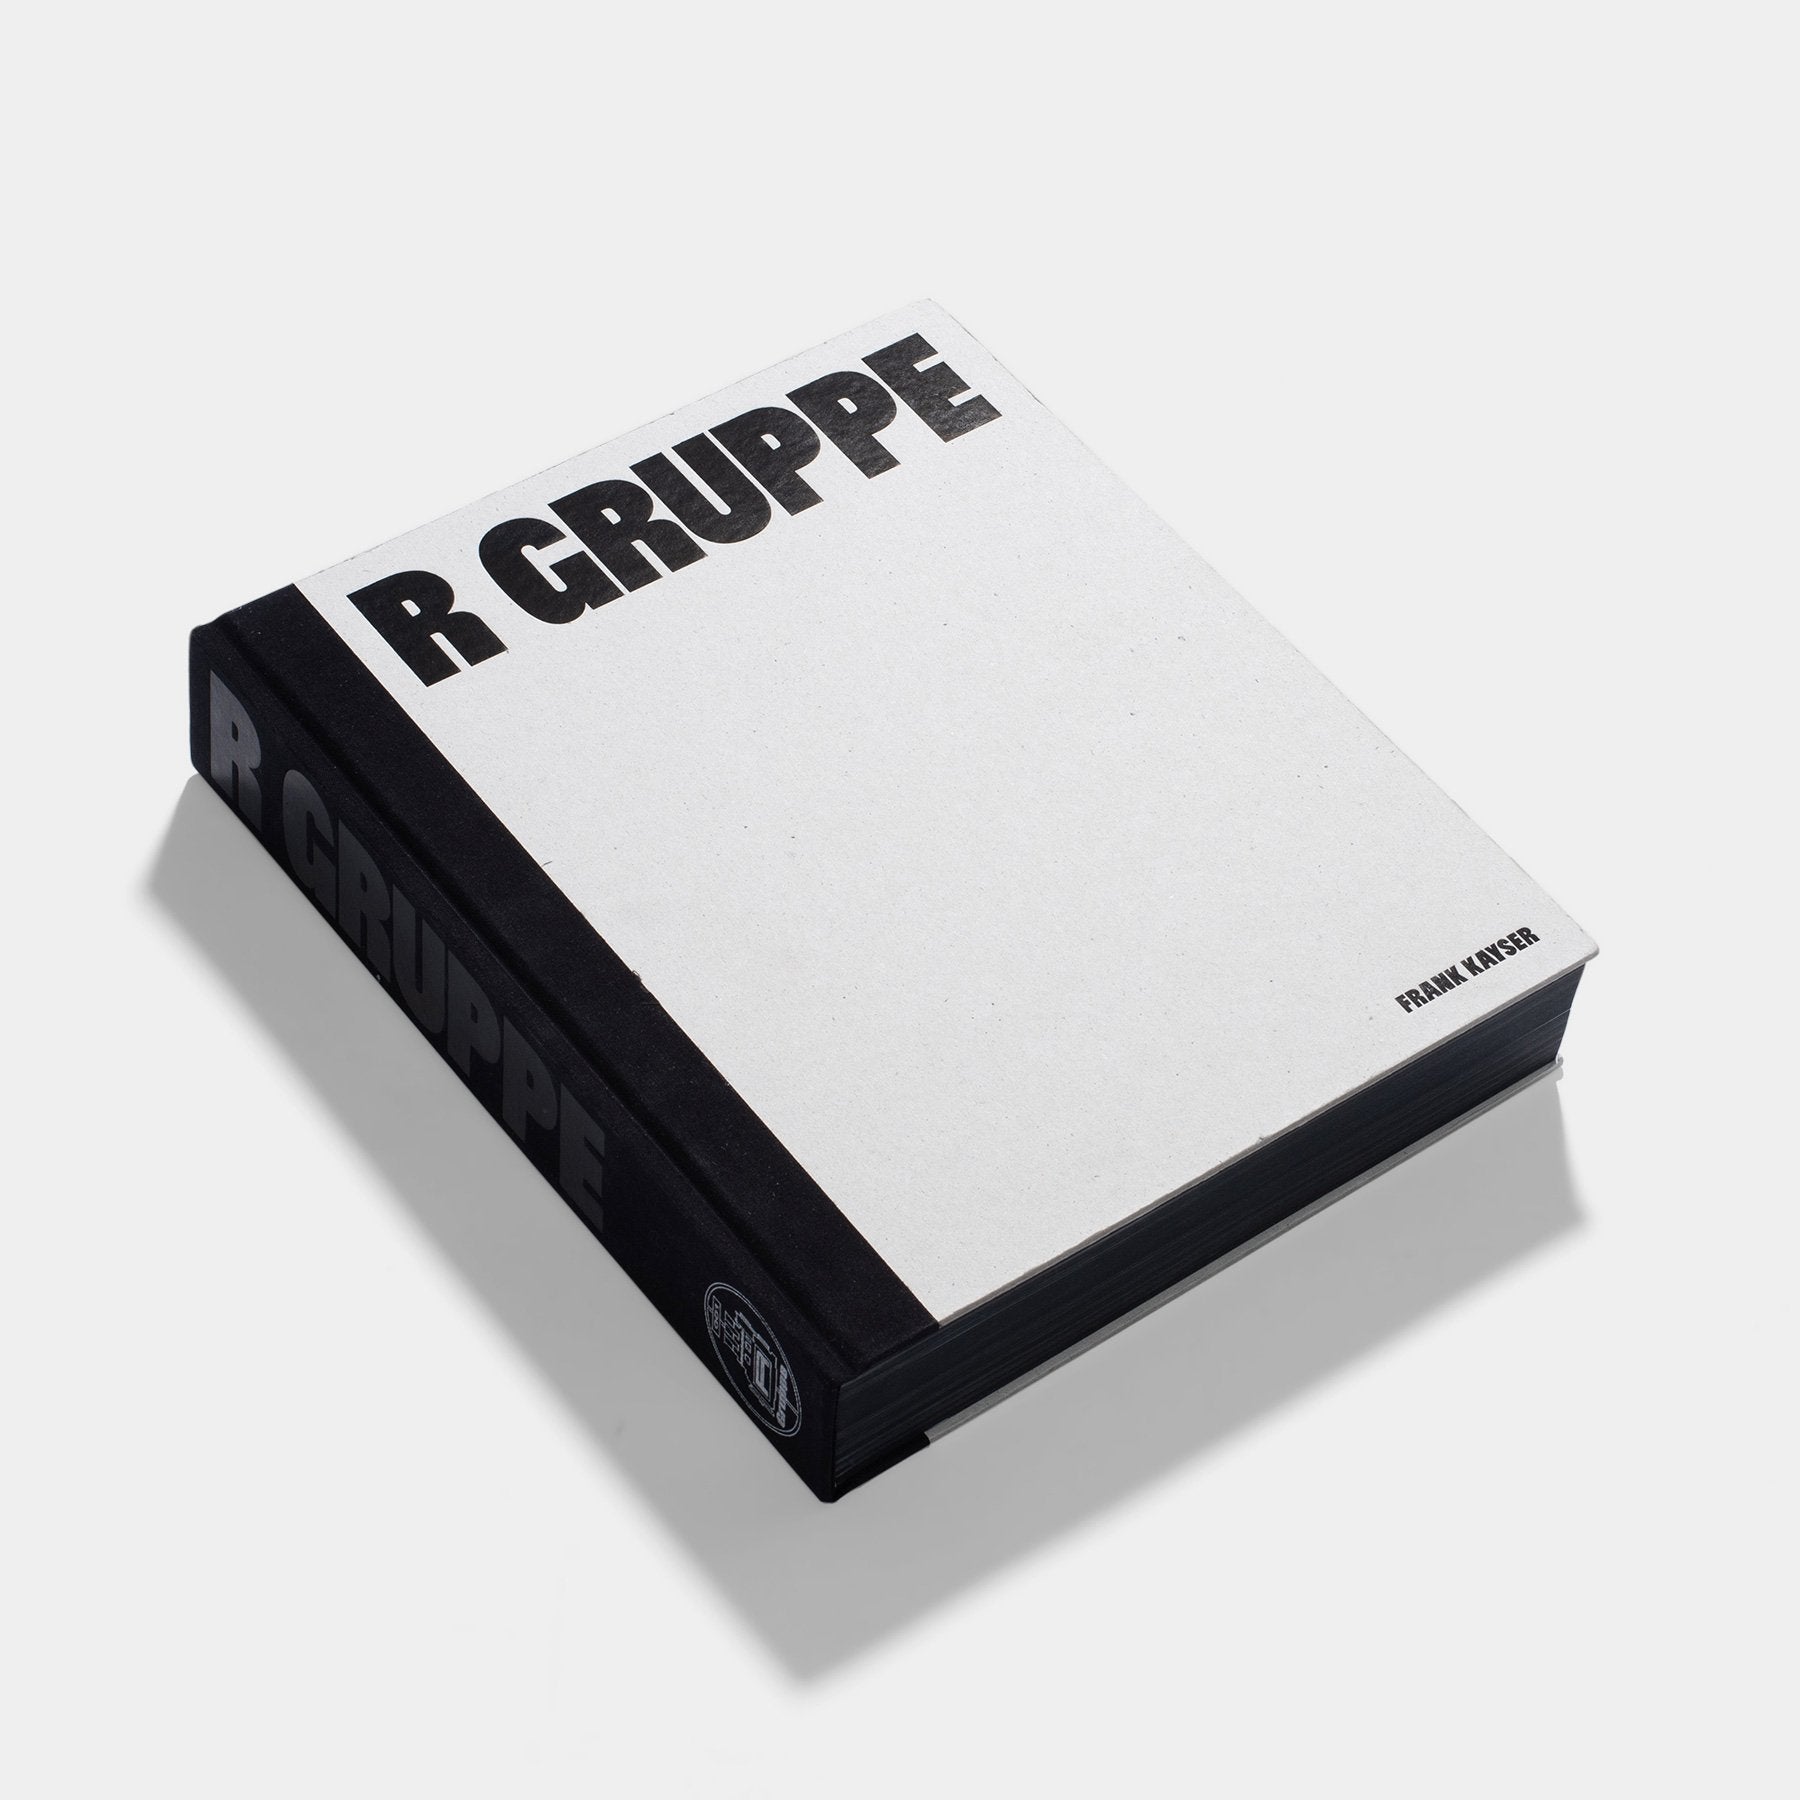 The R-Gruppe Book - A Porsche Lover Must Have